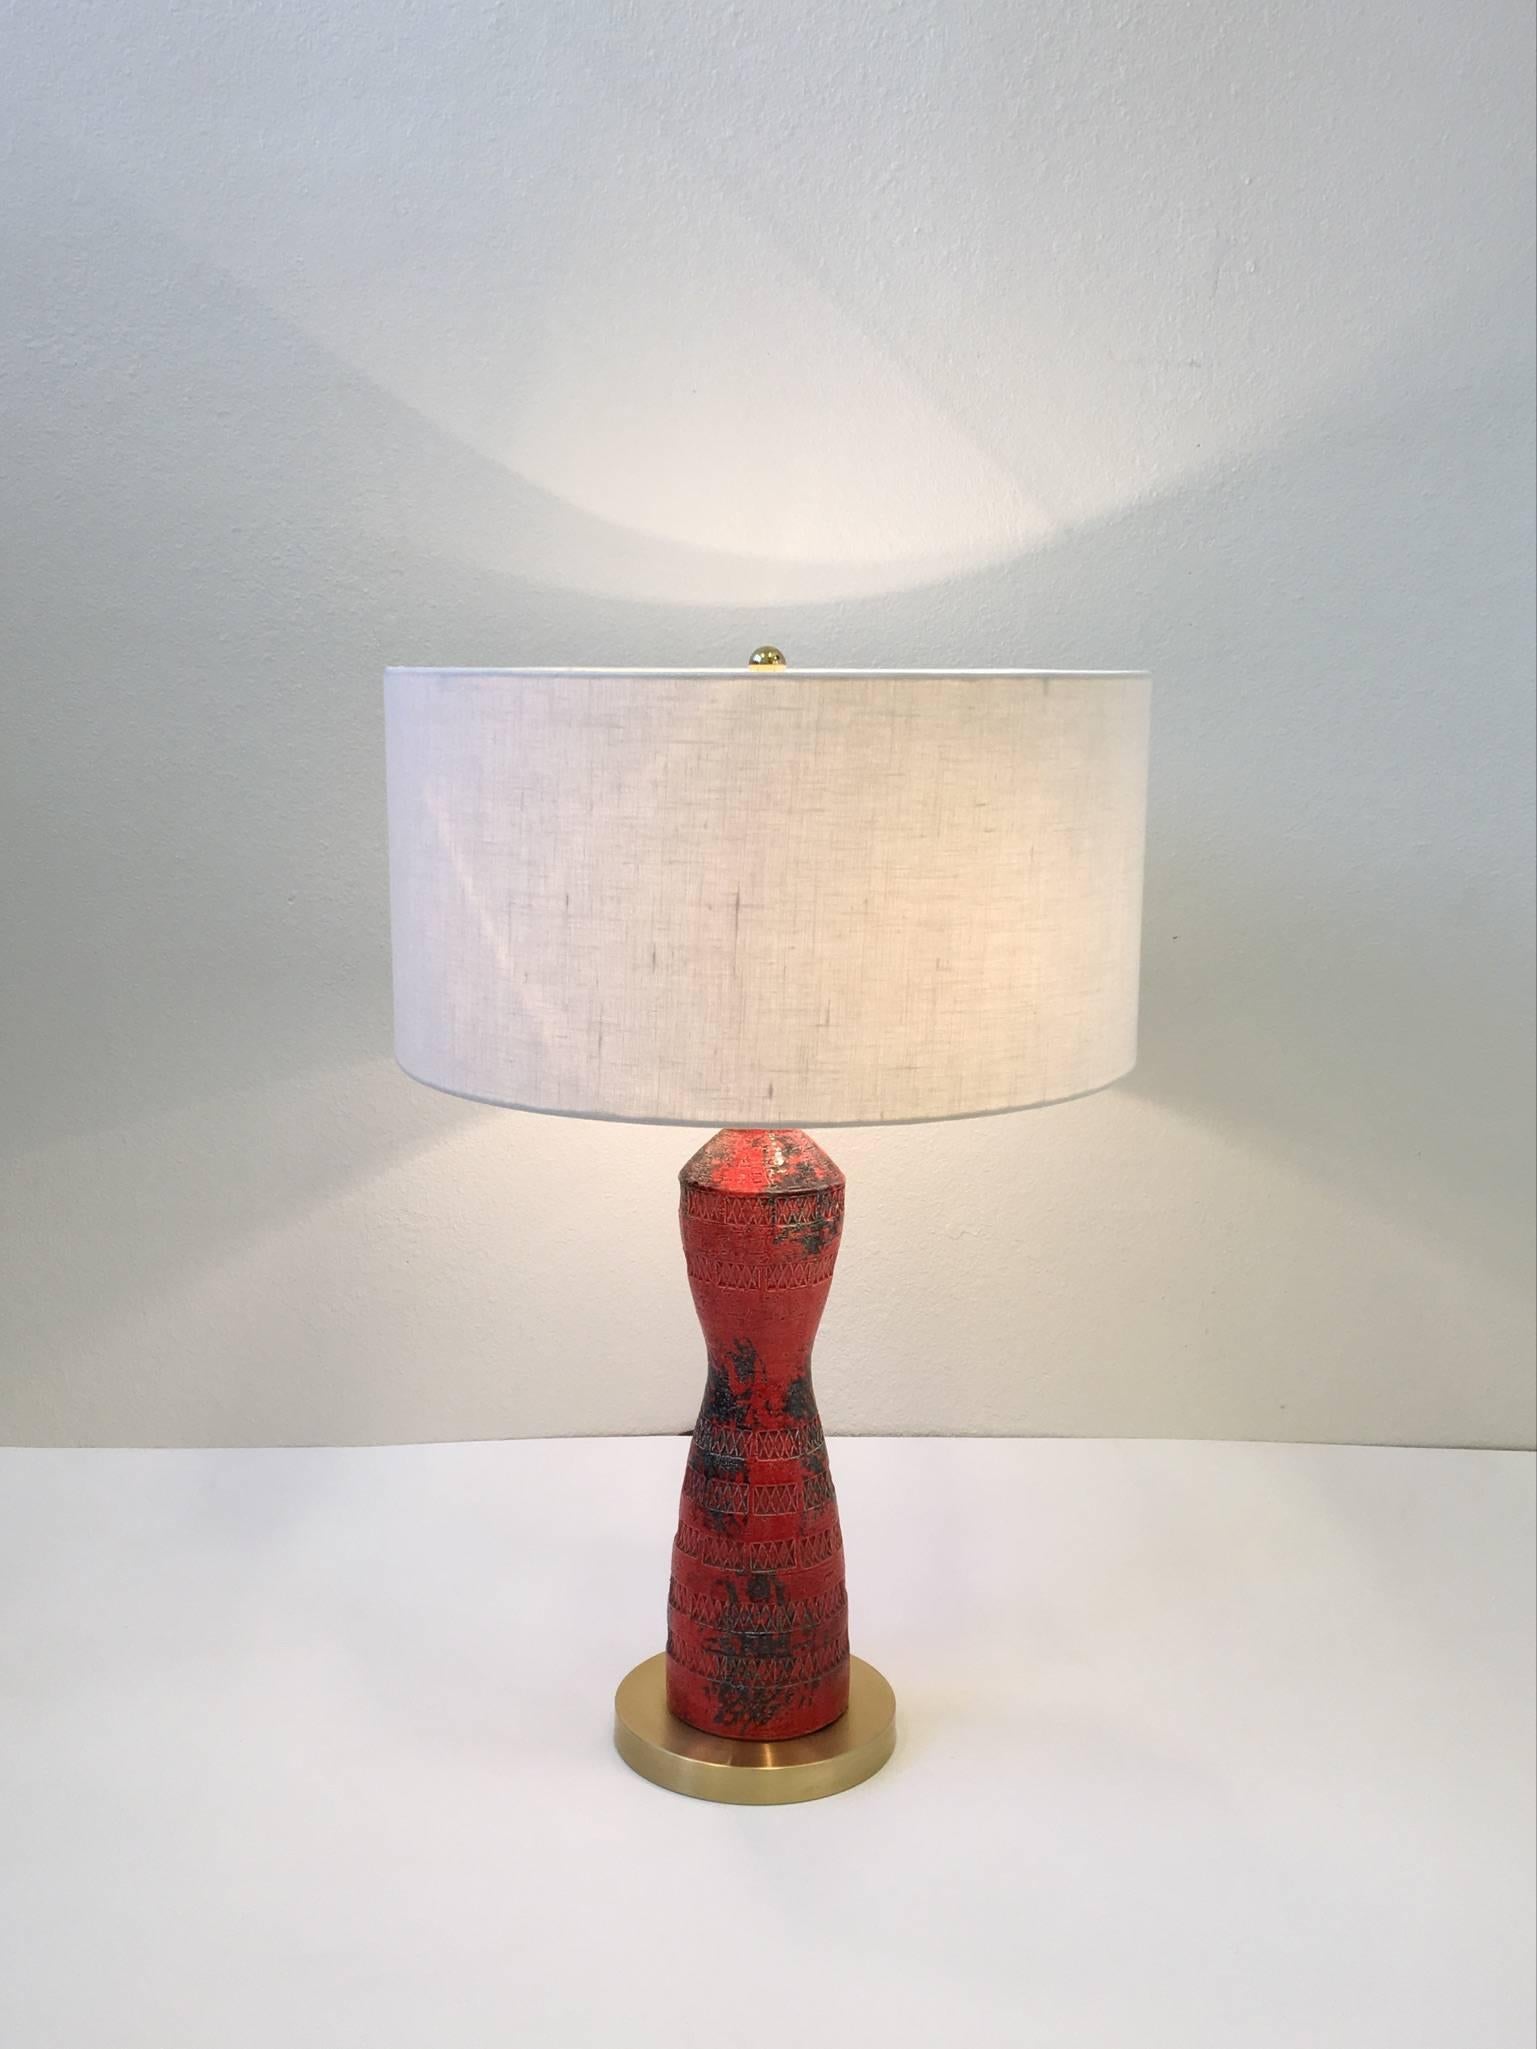 A rare red with black glazed Italian ceramic table lamp by Bitossi. Newly rewired with all new brass hardware, brown cloth wire and new vanilla color linen shade.

Dimension: 30